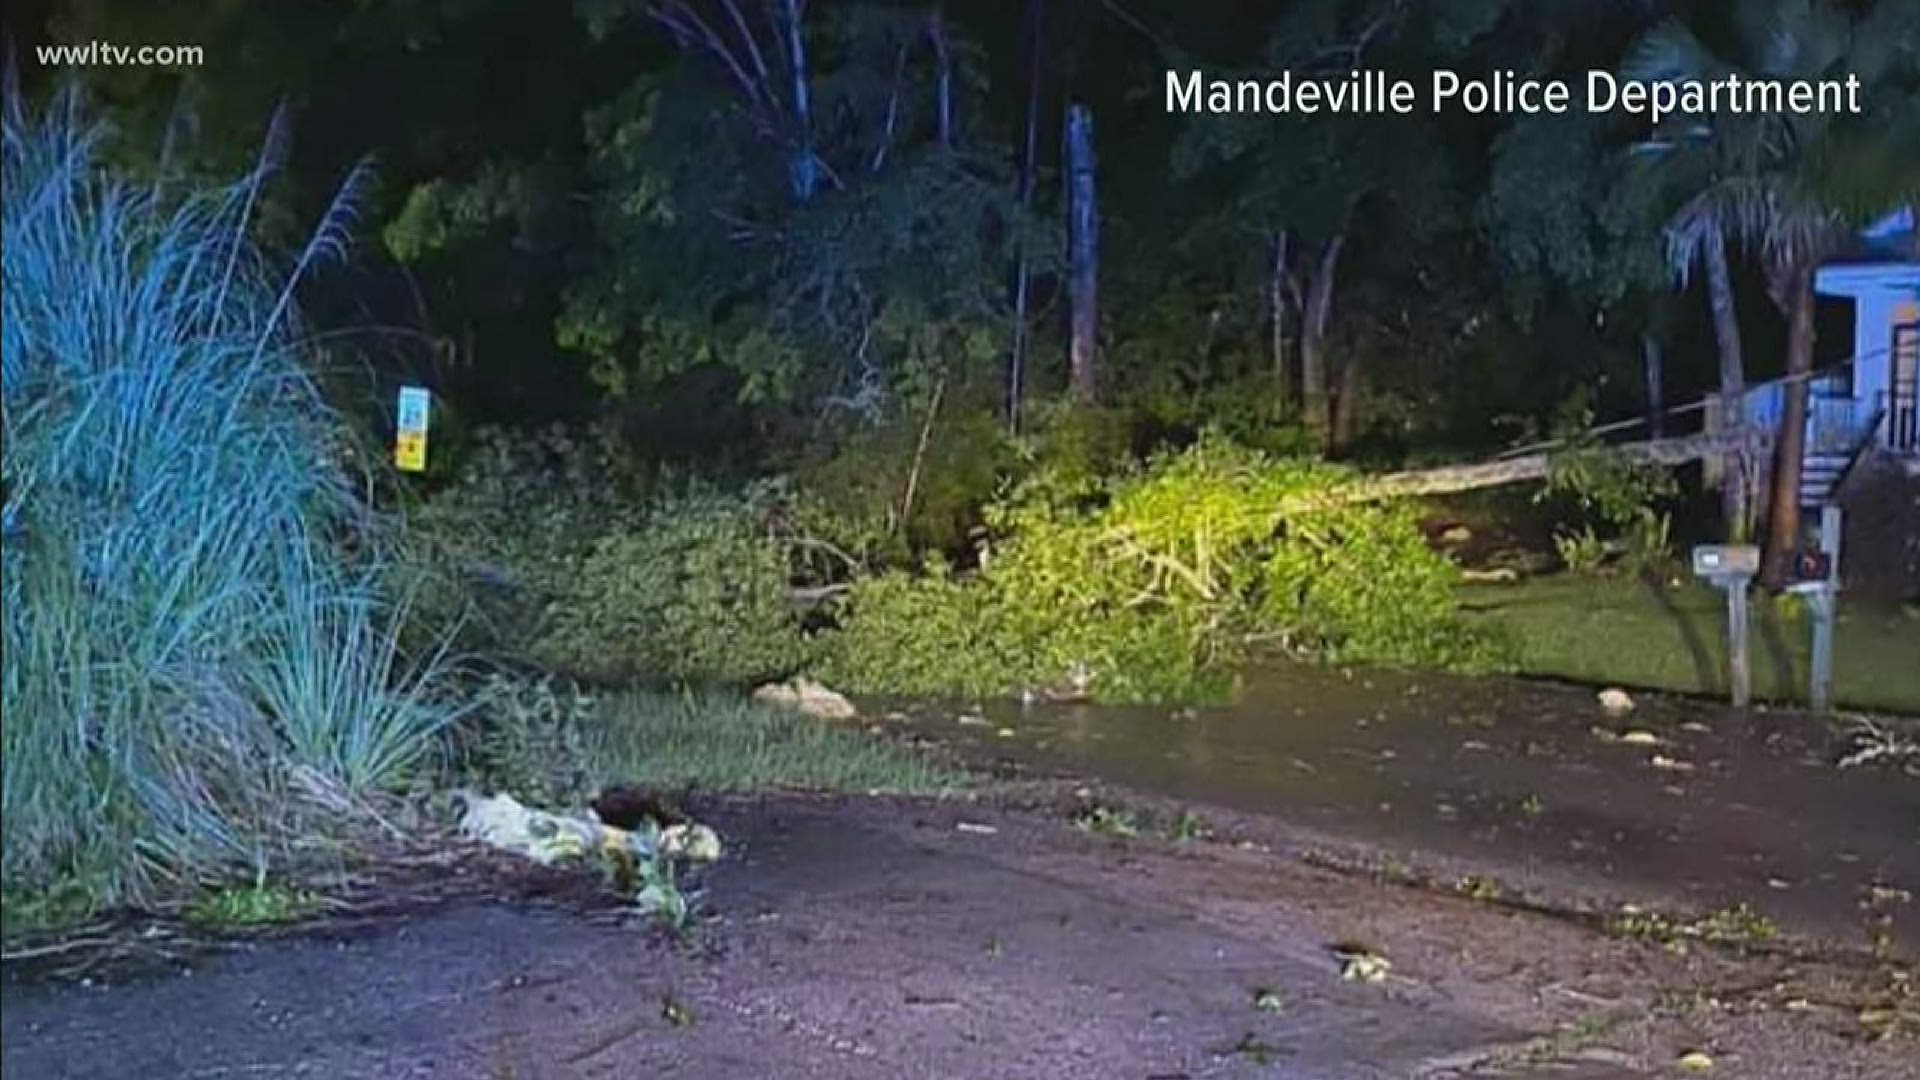 The weather event that downed several trees and power lines and caused significant property damage in Mandeville Sunday night was an EF-1 tornado, the NWS says.